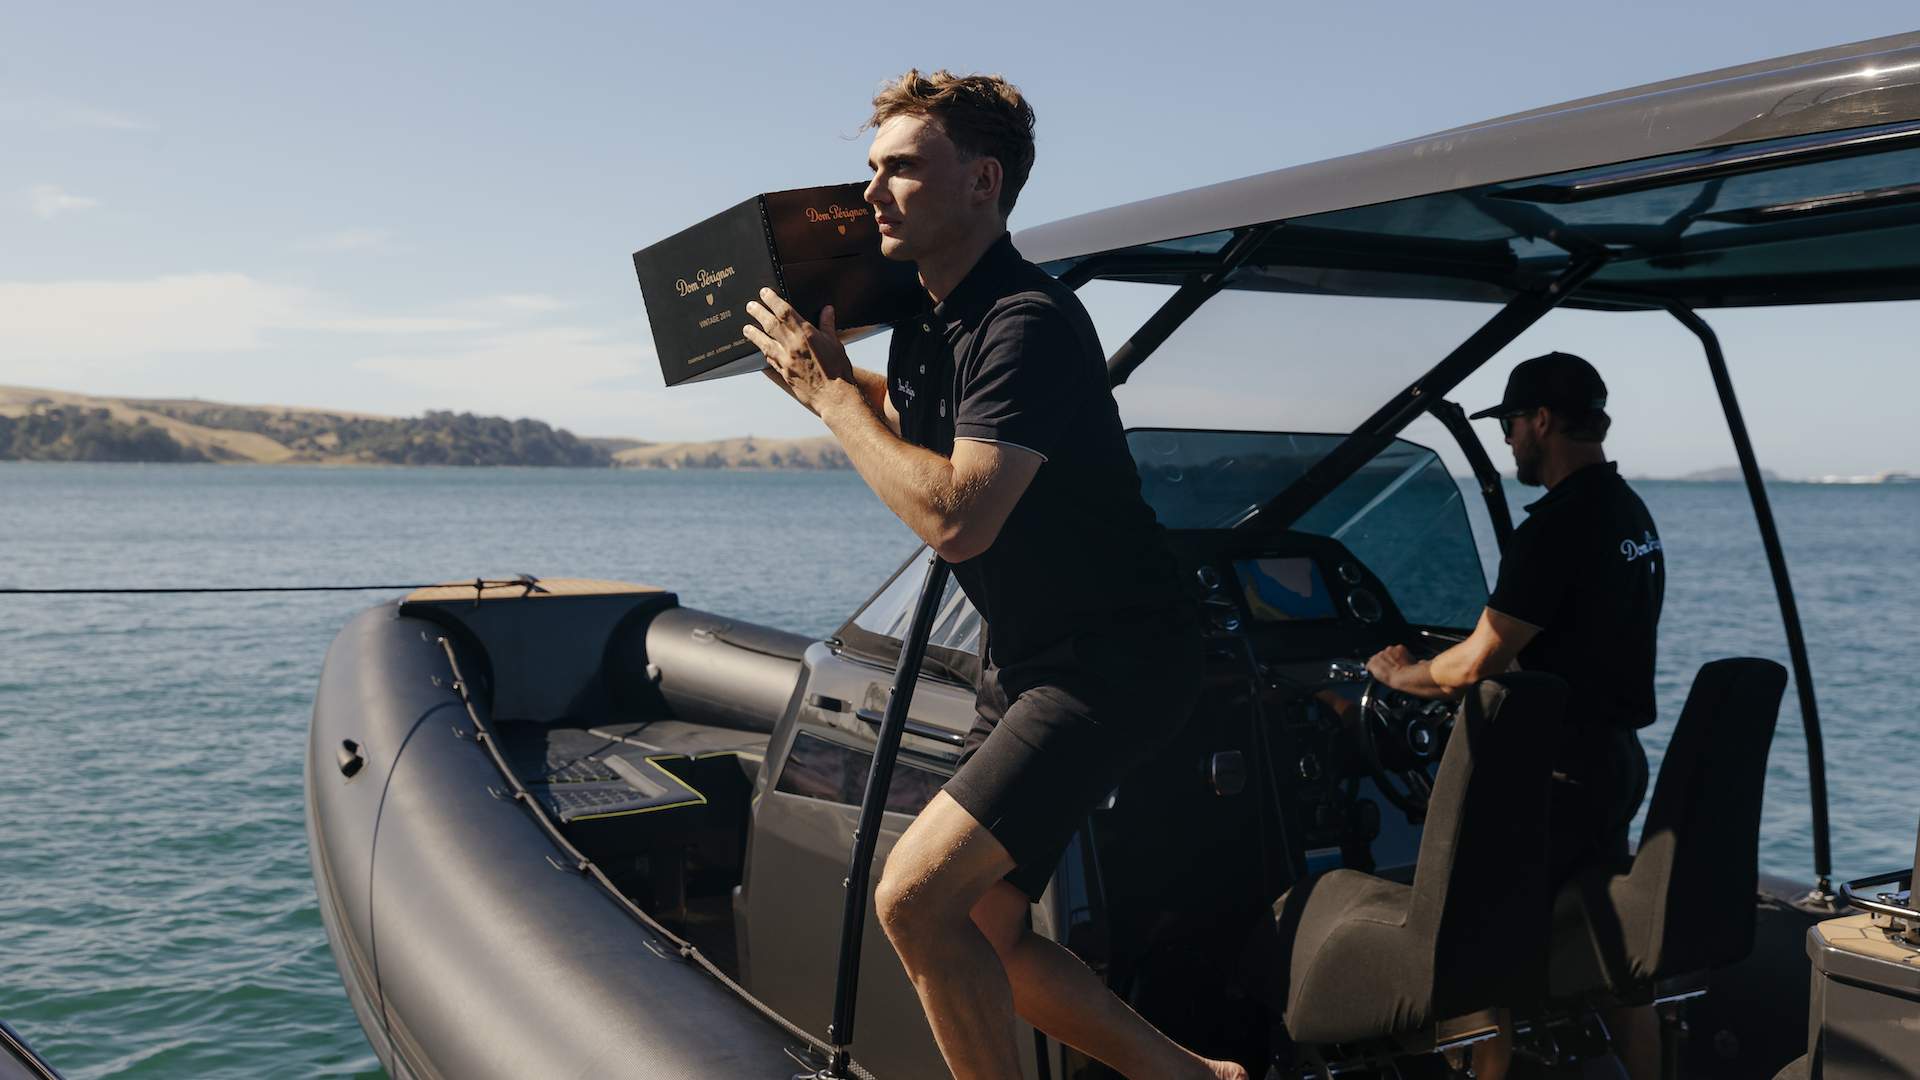 This OTT Service Will Deliver Champagne Direct to Your Boat in the Hauraki Gulf